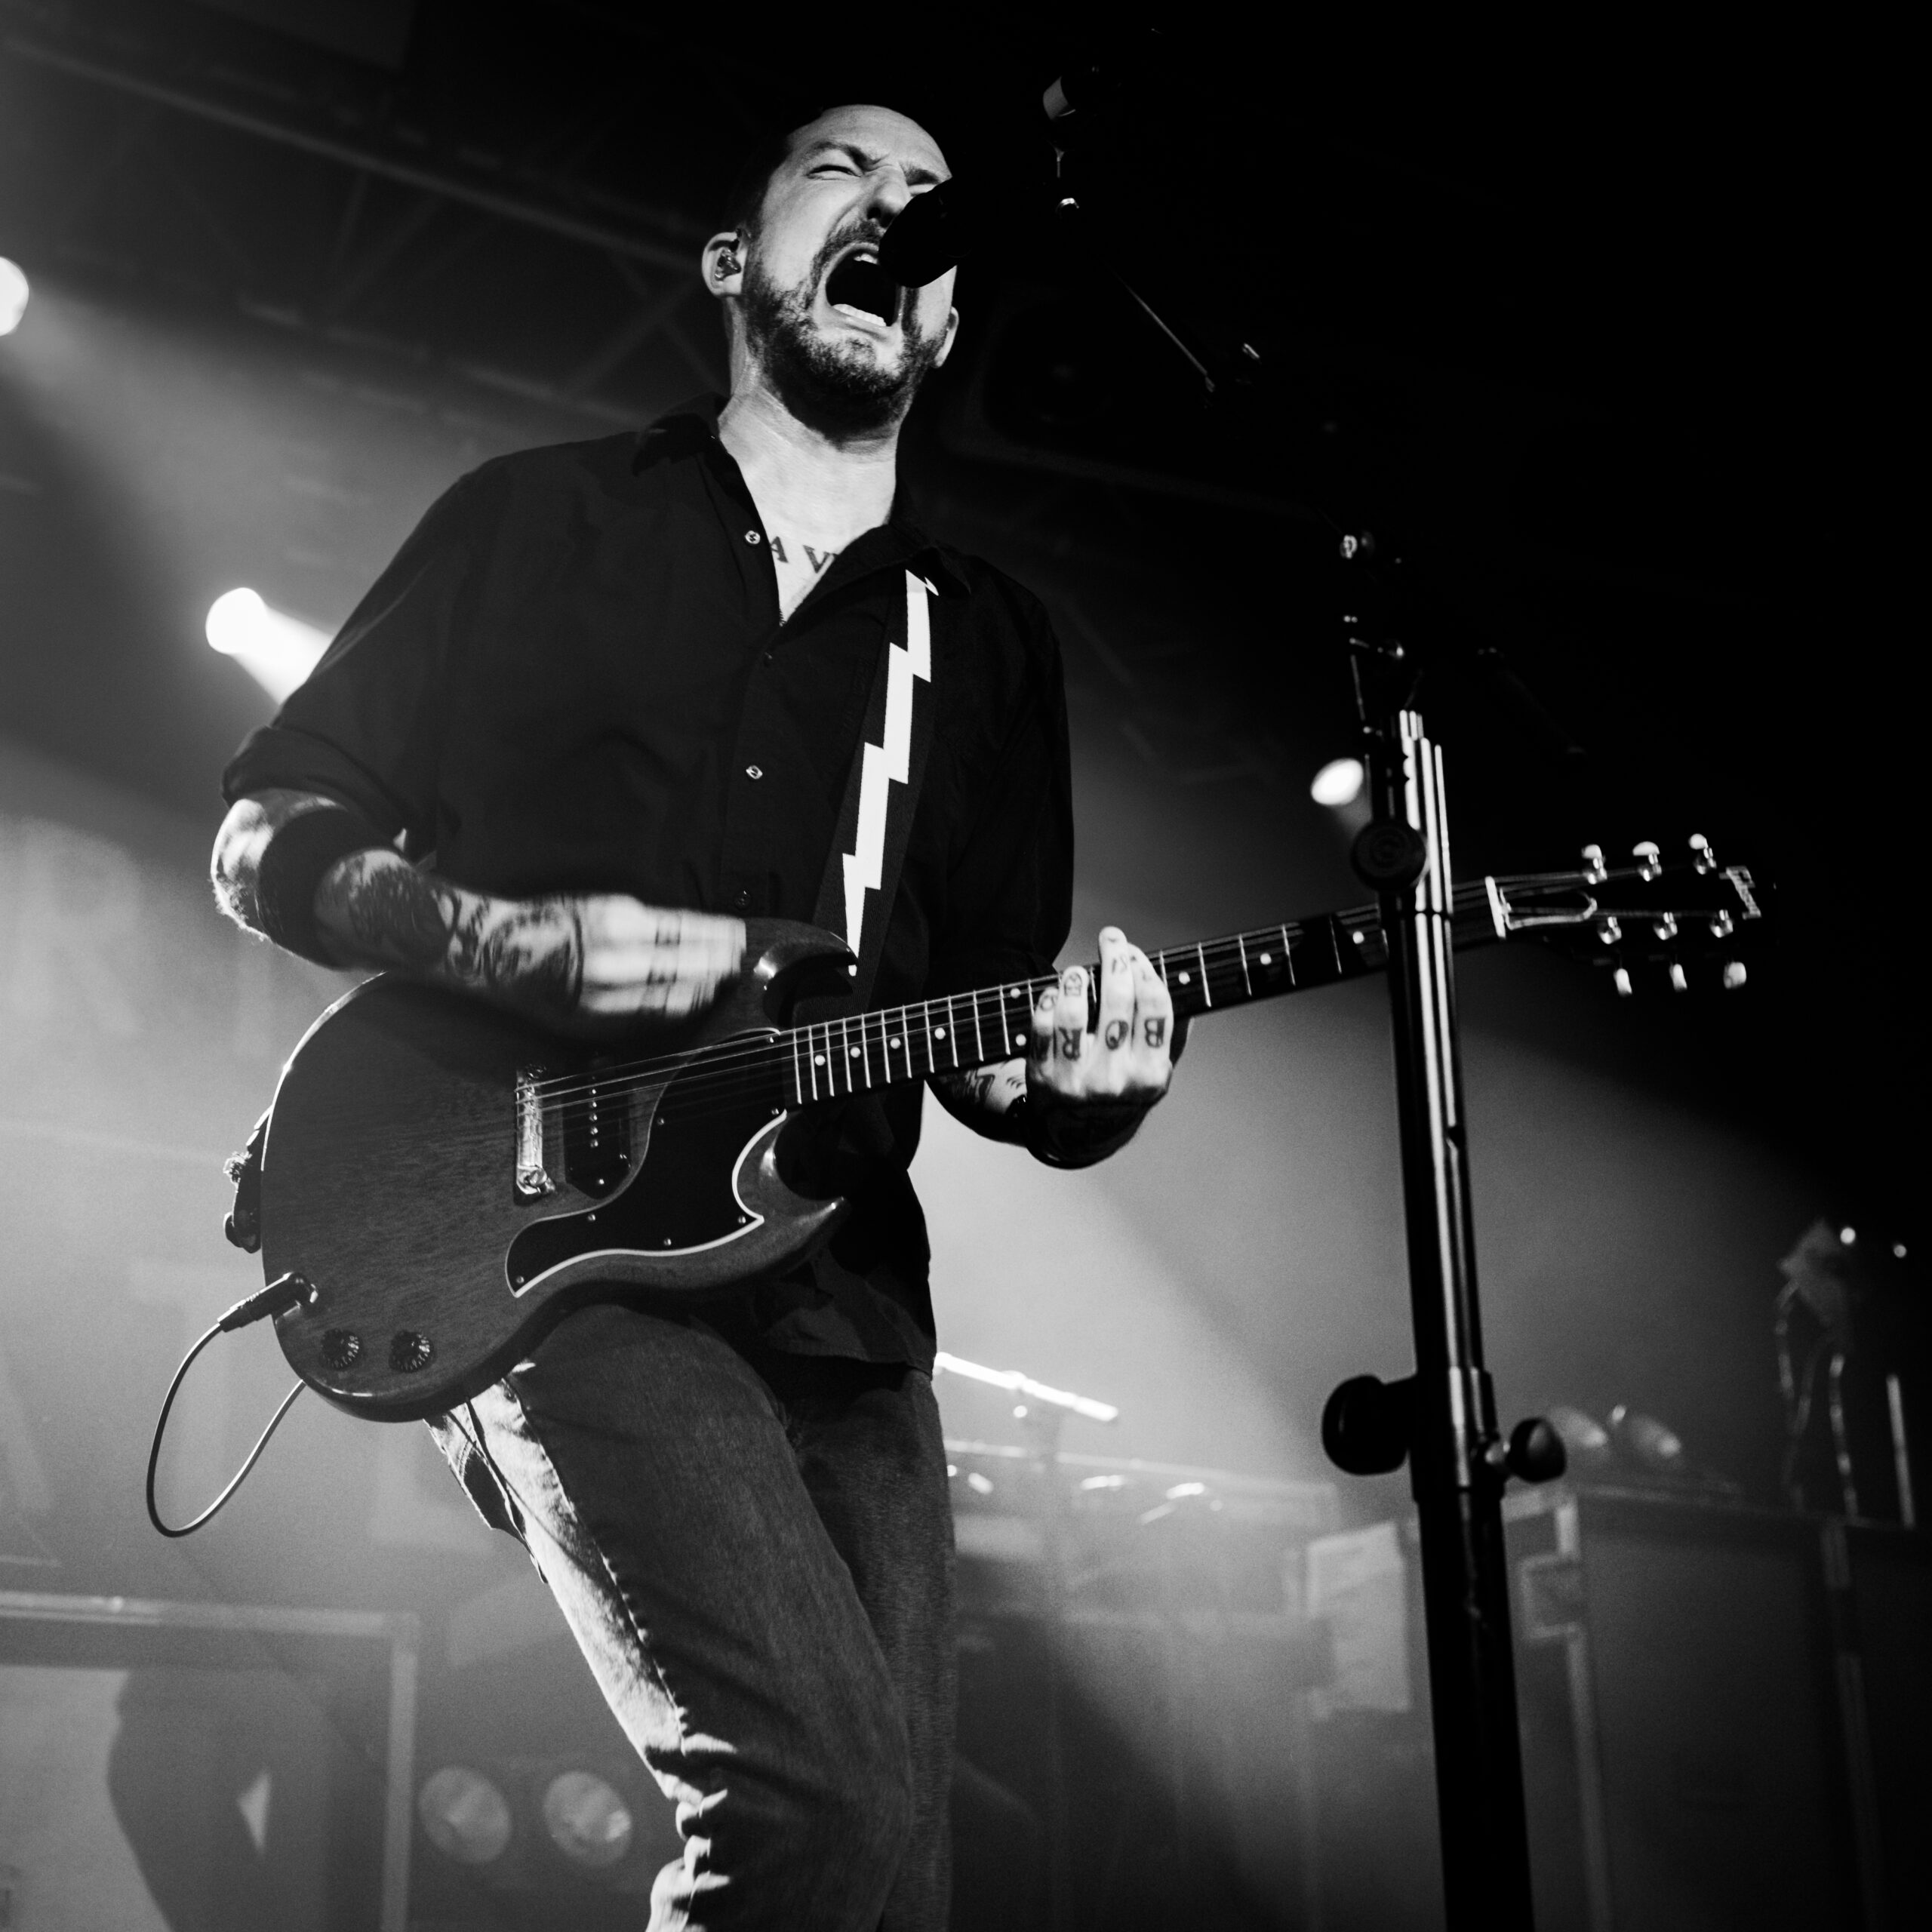 FRANK TURNER HITS CARDIFF ON SELL OUT UK TOUR